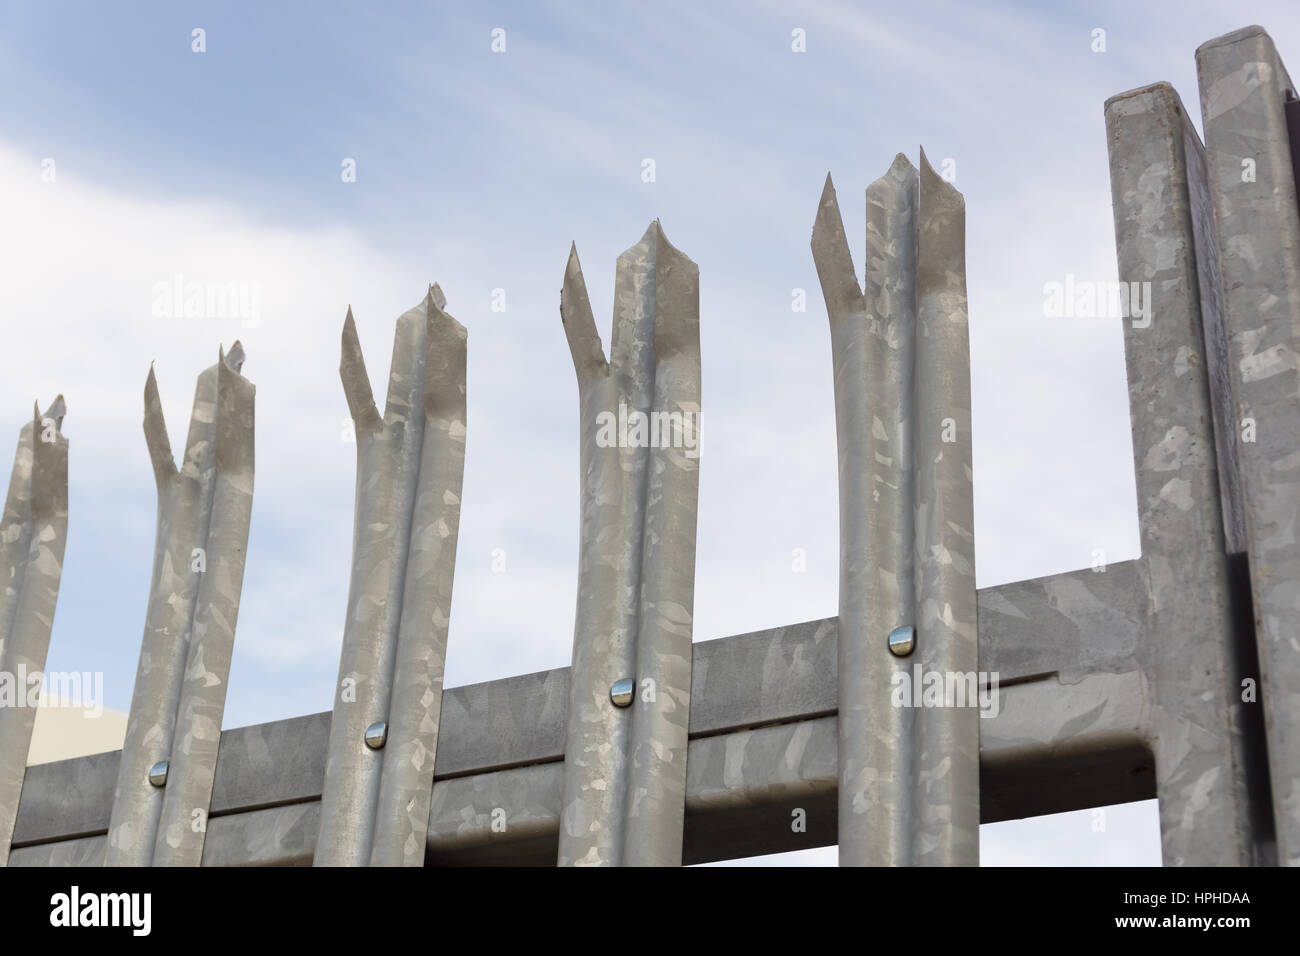 Galvanised steel spikes on top of a security gate or fence Stock Photo